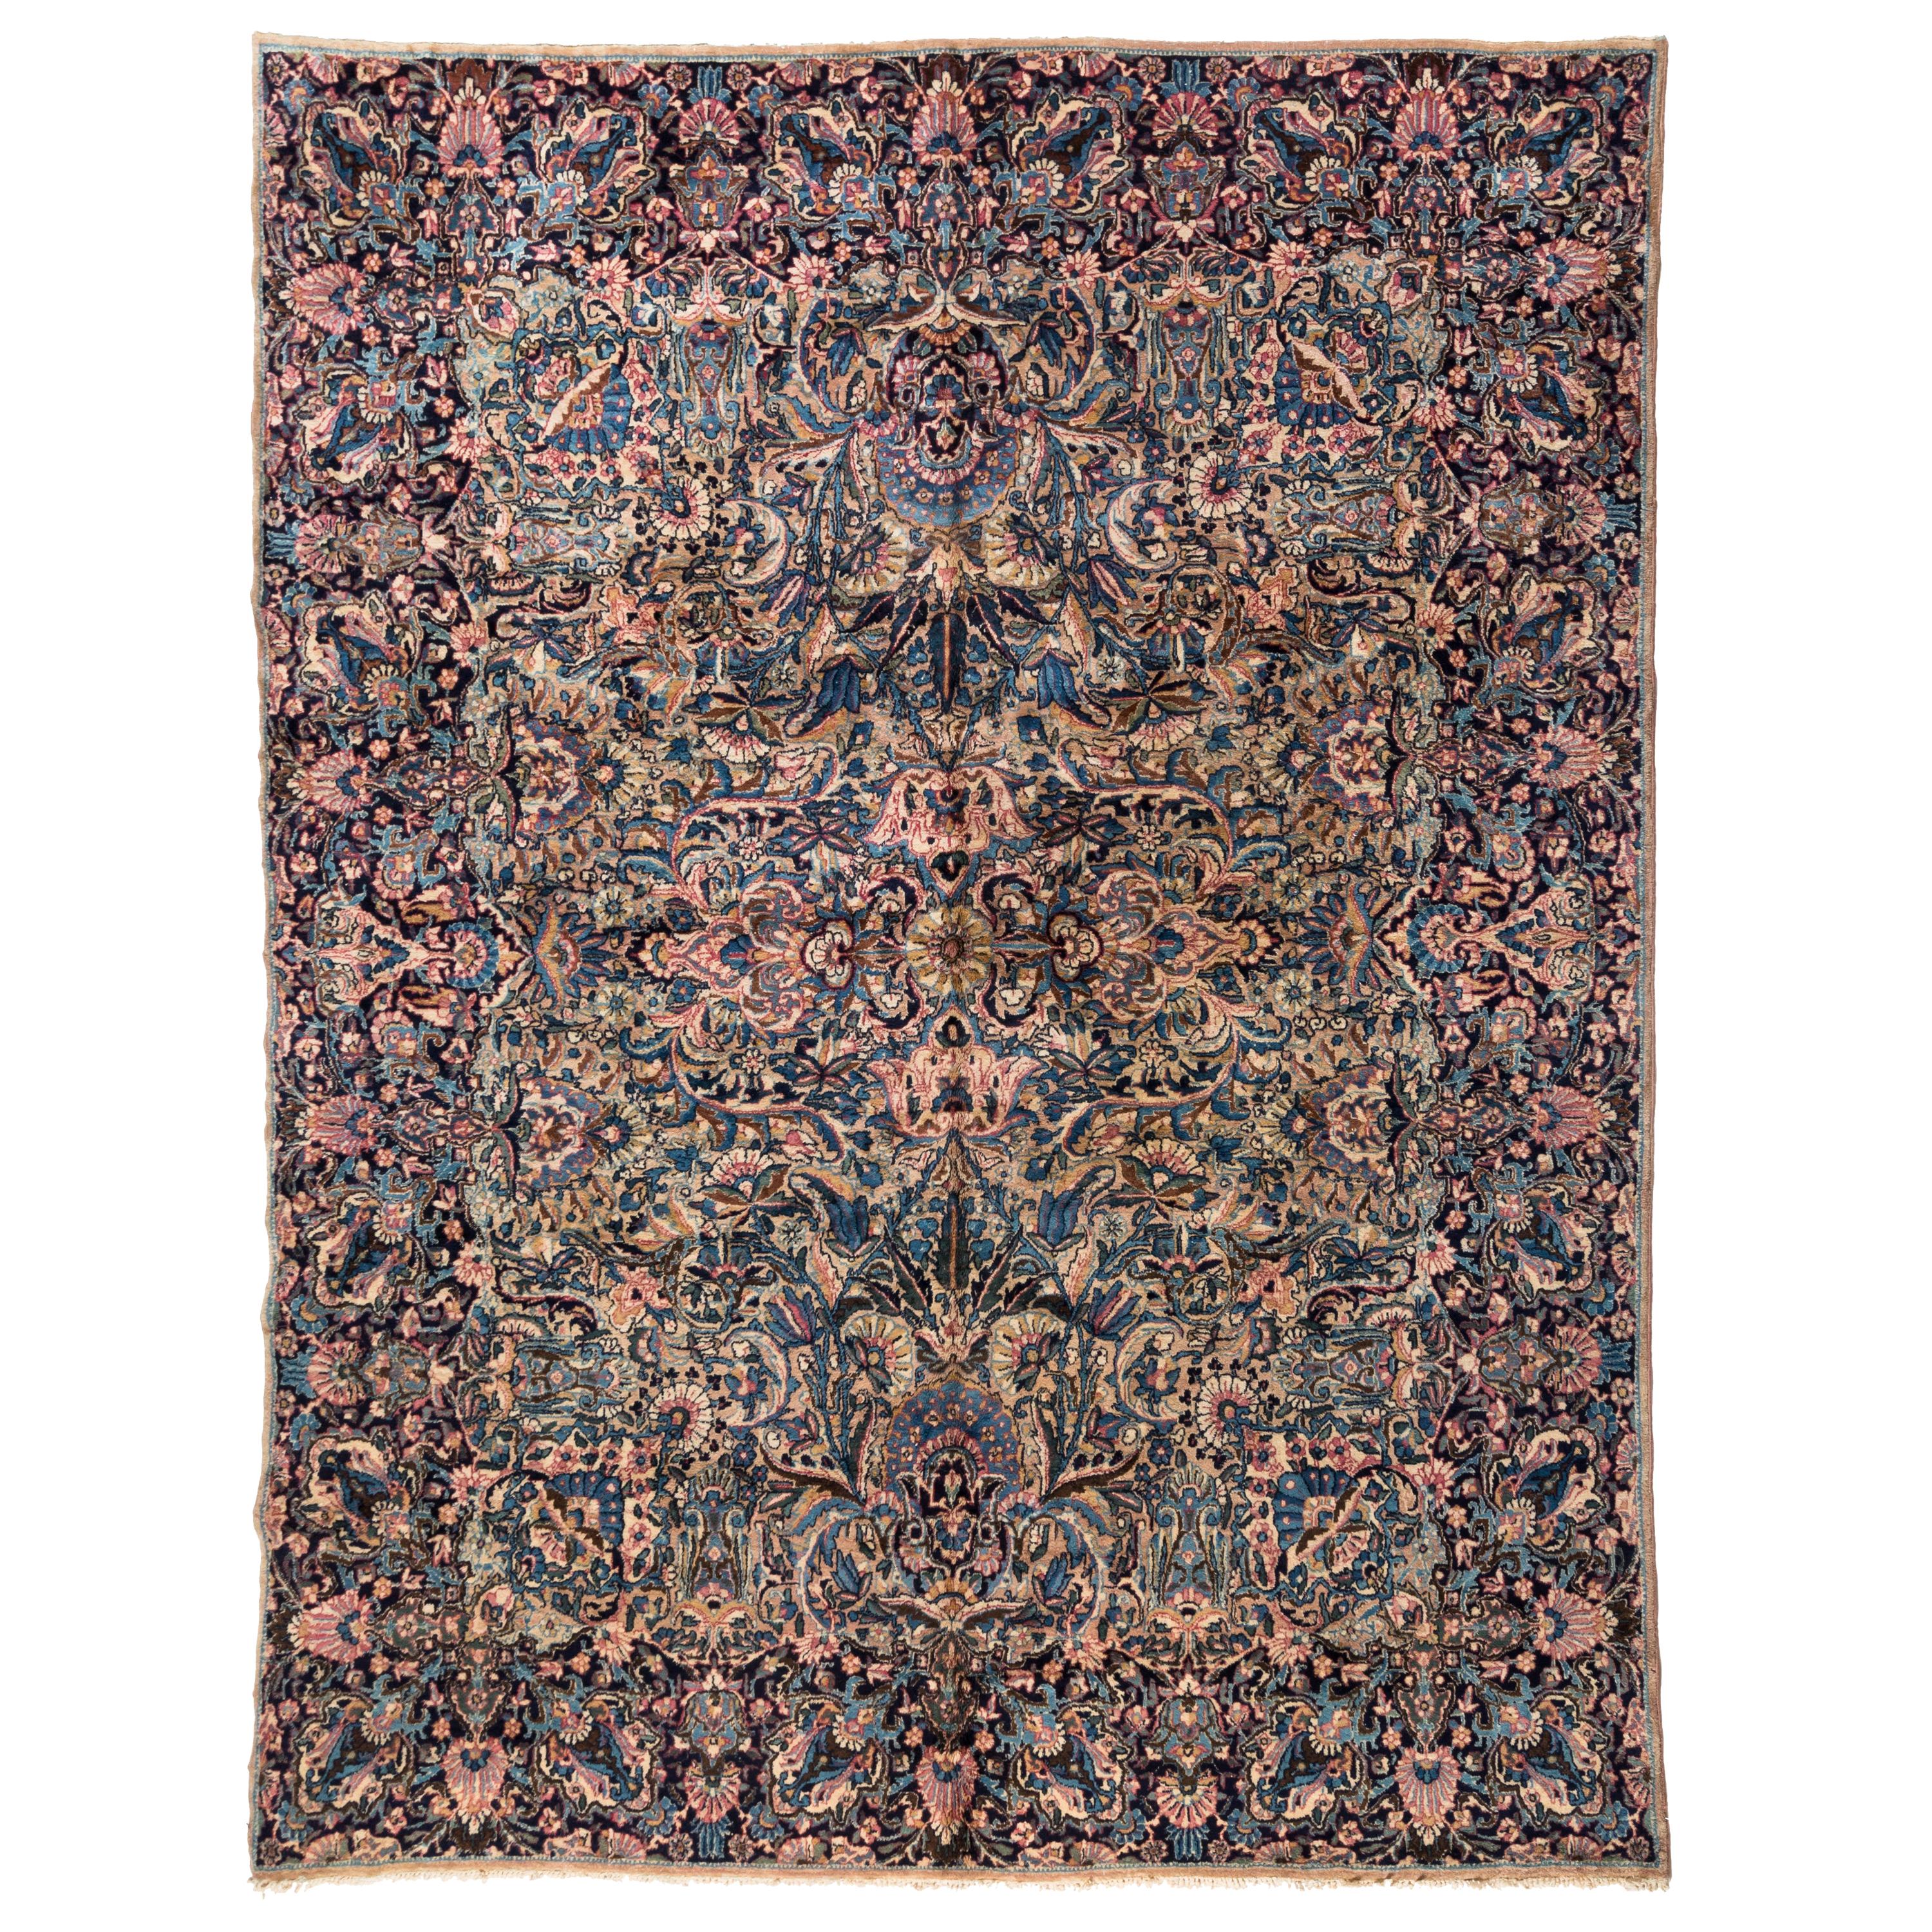 Antique Persian Blue and Ivory Floral Kirman Rug circa 1930-1940s